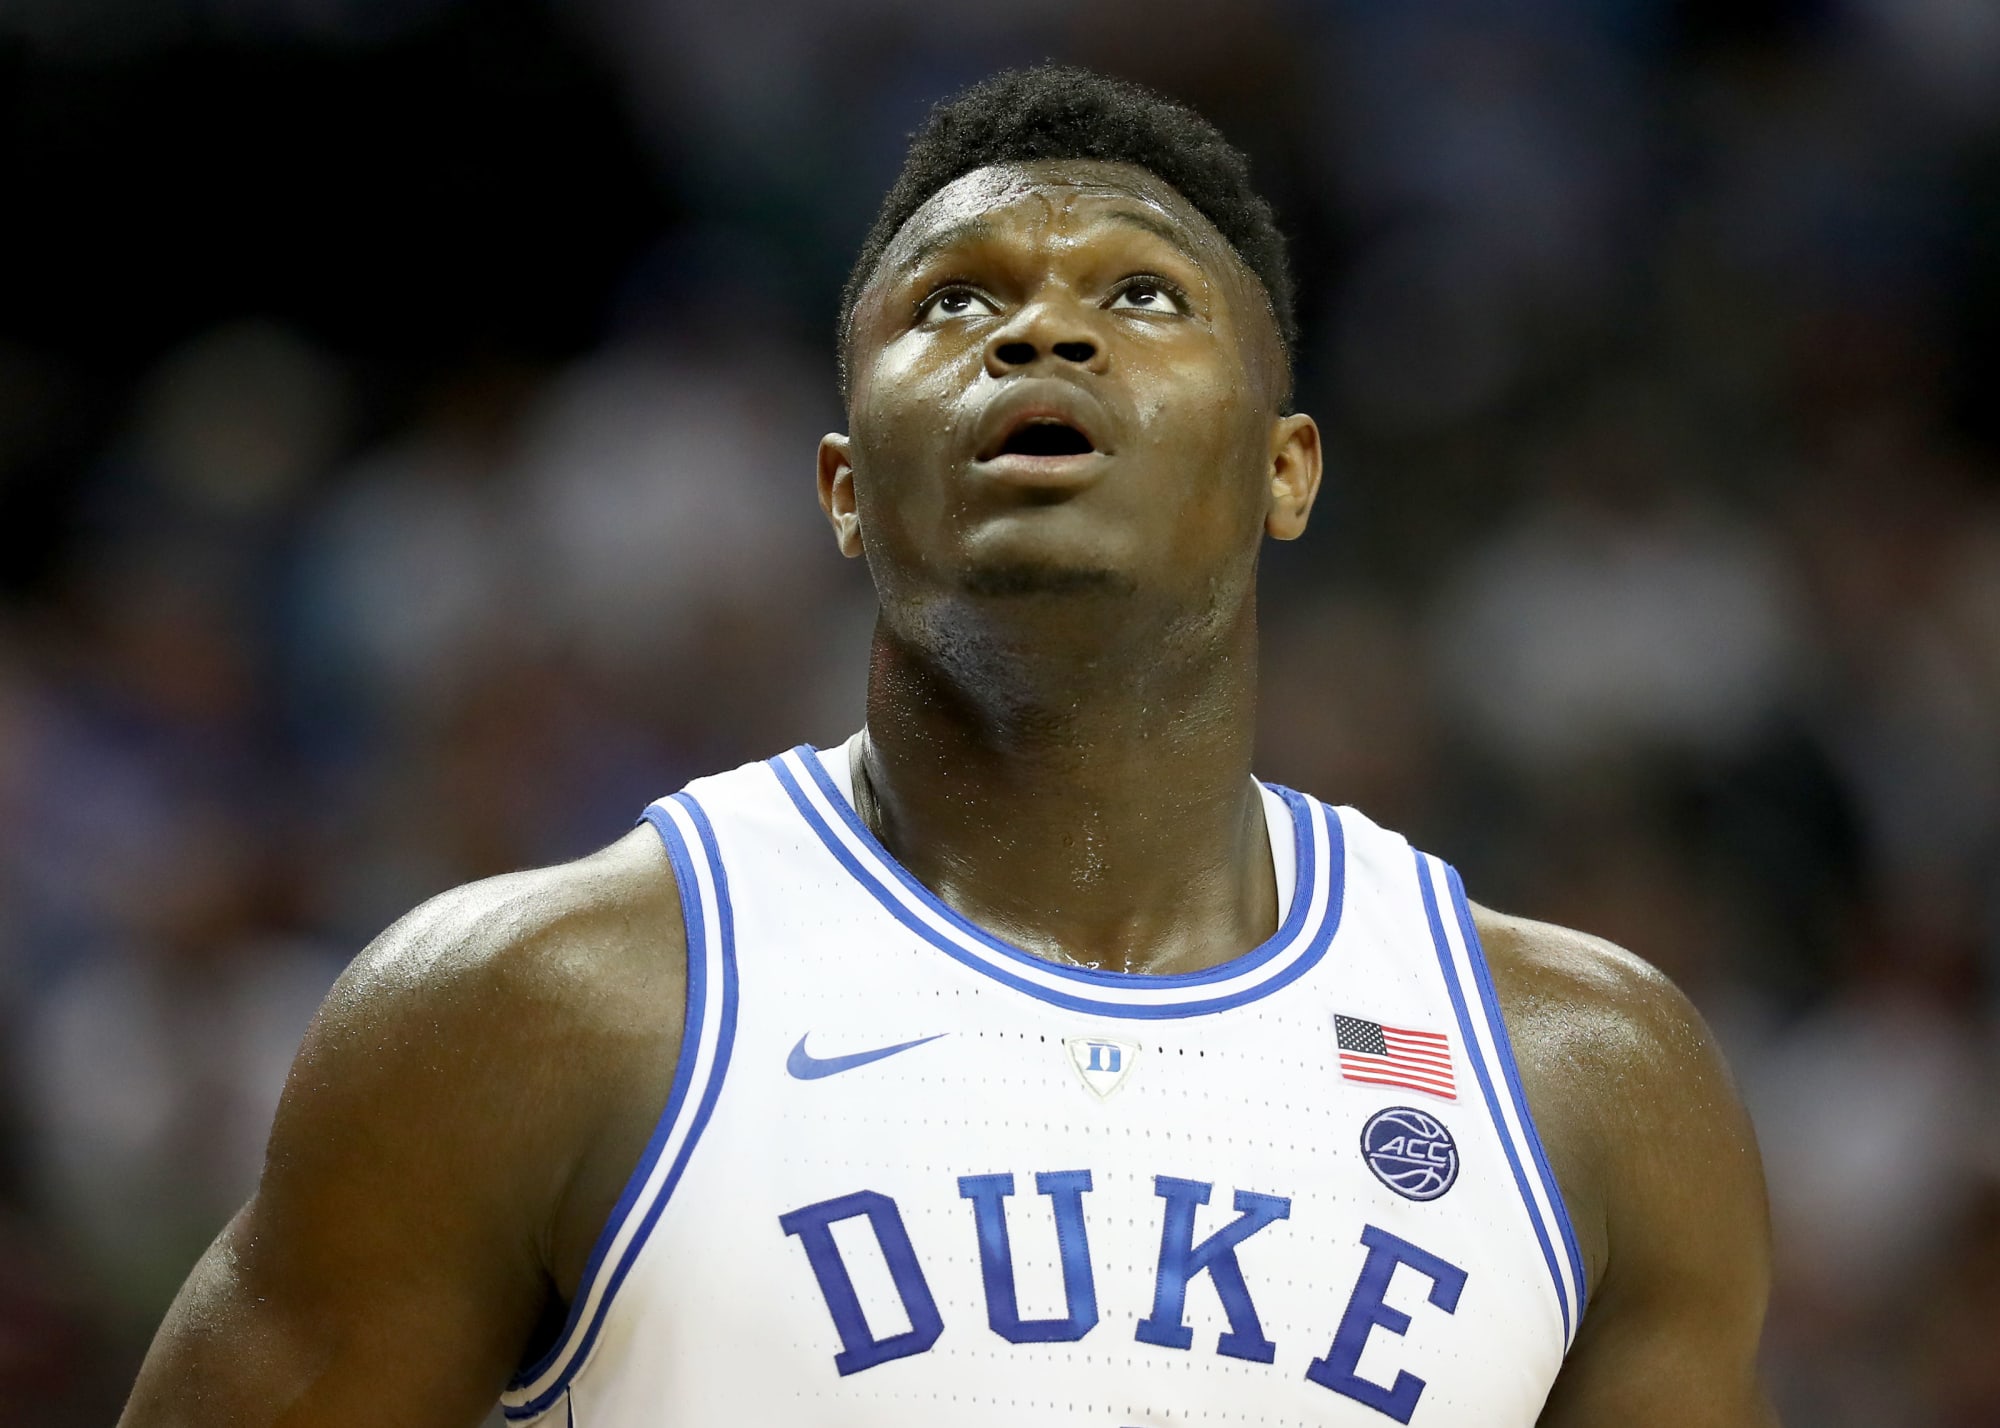 Forecast for 2025 Duke basketball players among top four in NBA